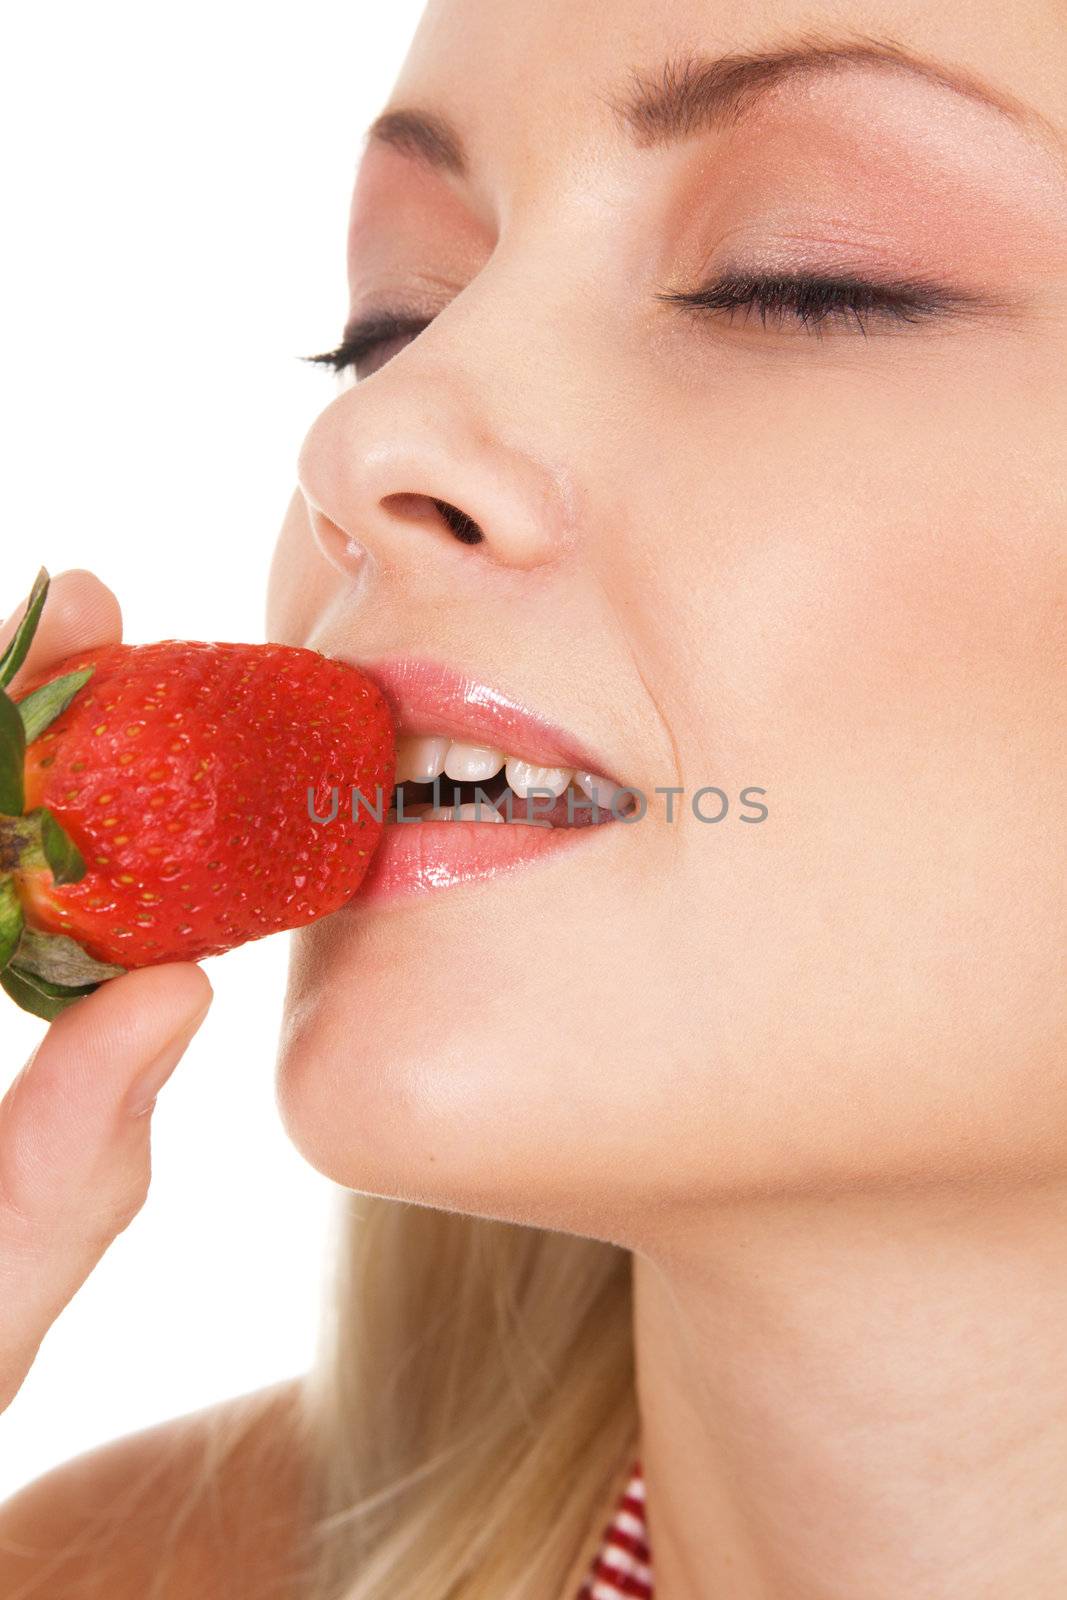 Beautiful girl tasting a strawberry, face portrait